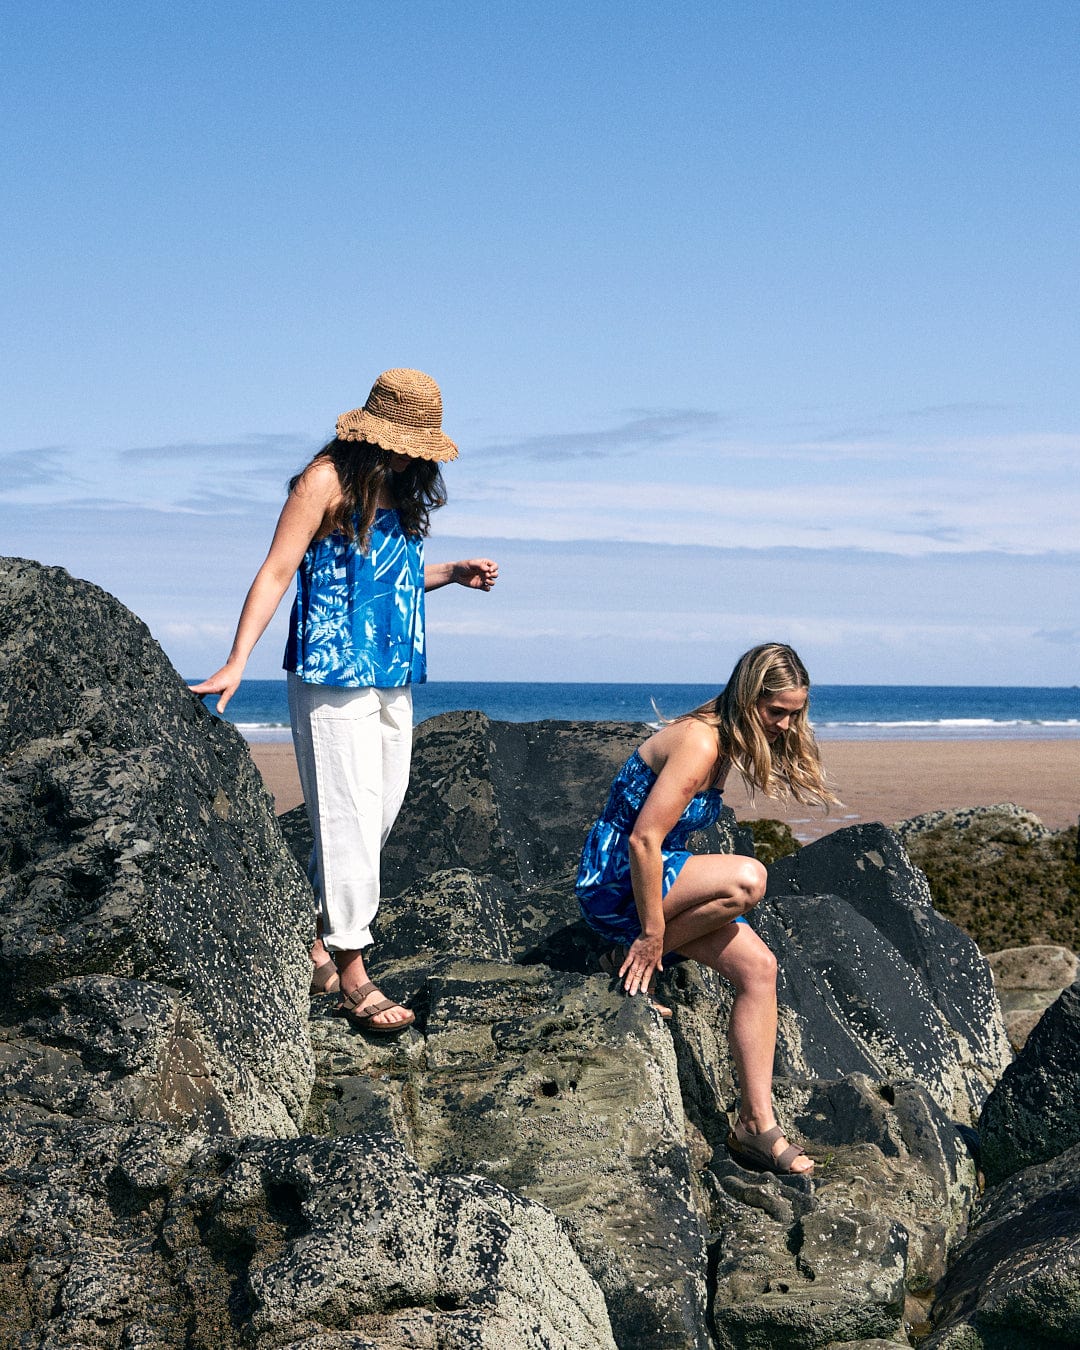 Two women in Cyanotype - Womens Cami - Blue by Saltrock and summer hats, made from lightweight material, climb large rocks on a beach under a clear blue sky. One of them is stepping down while the other stands and looks around.